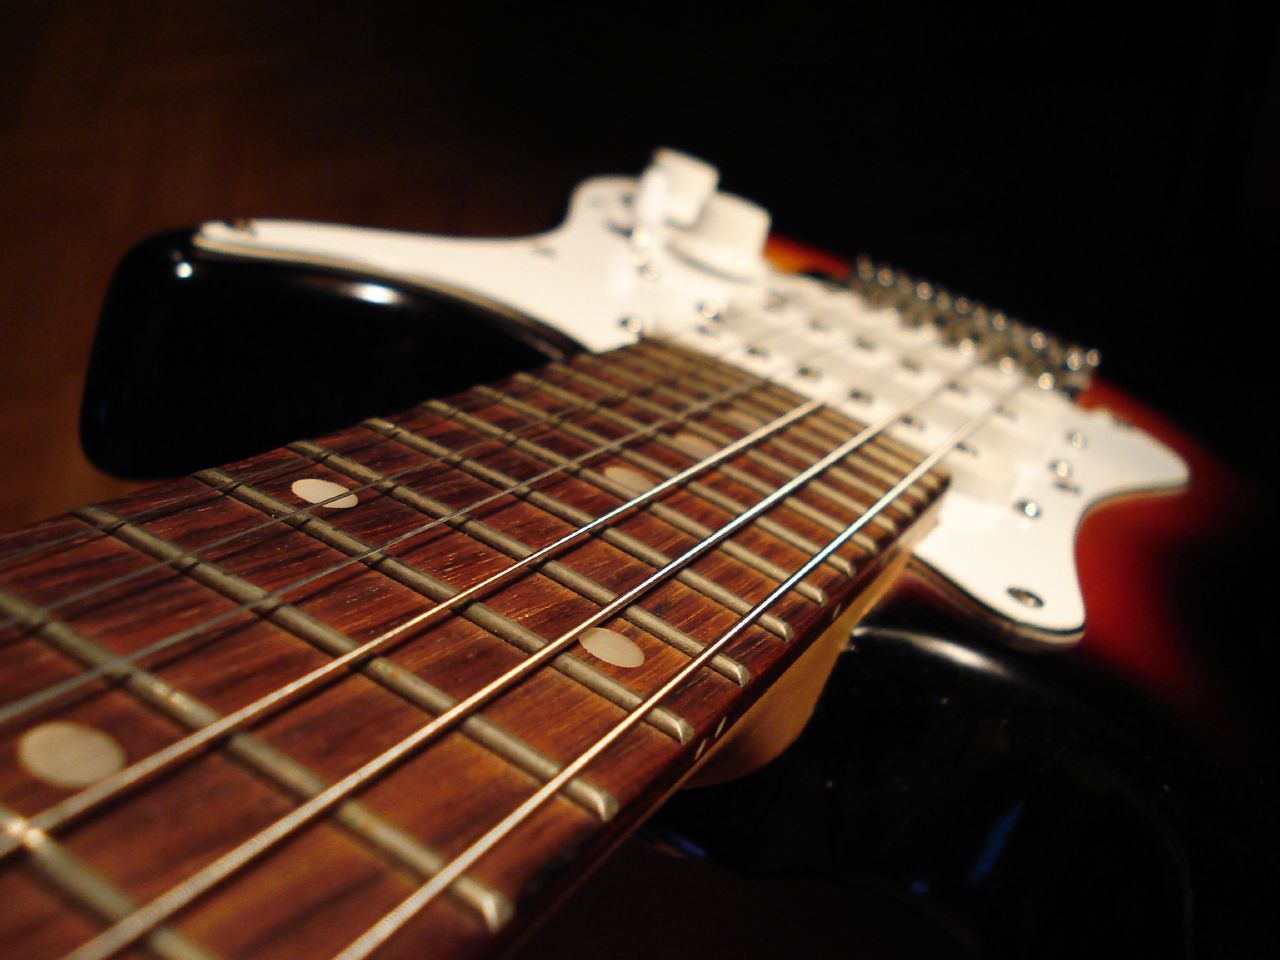 the neck of a bass guitar is shown with the frets